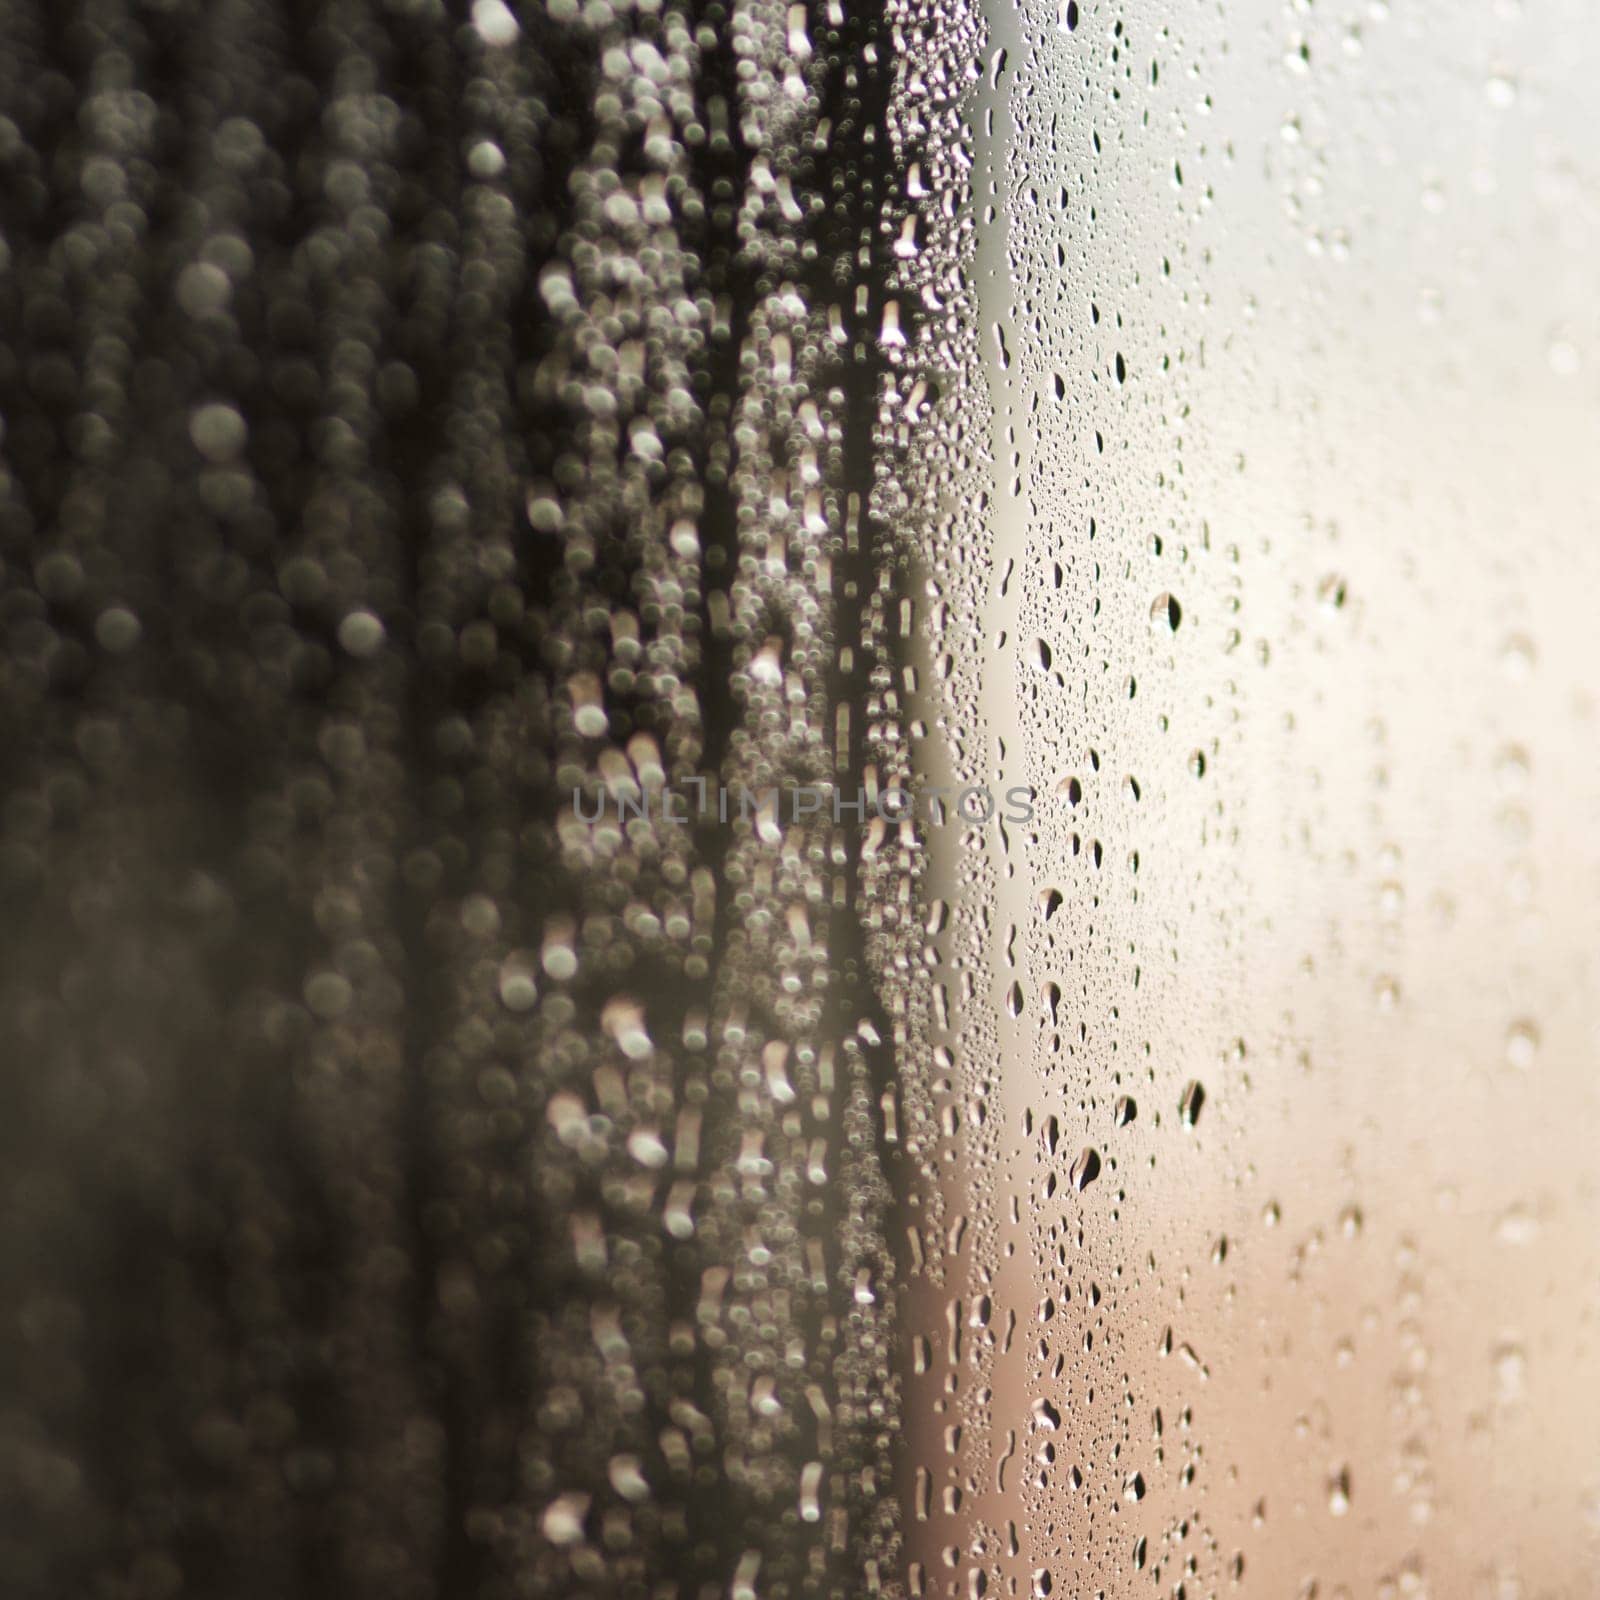 Glass, water or raindrops with steam on surface, texture and wallpaper or screensaver with abstract. Moisture, humid or liquid bubble on window, condensation and droplet with fog or reflection.